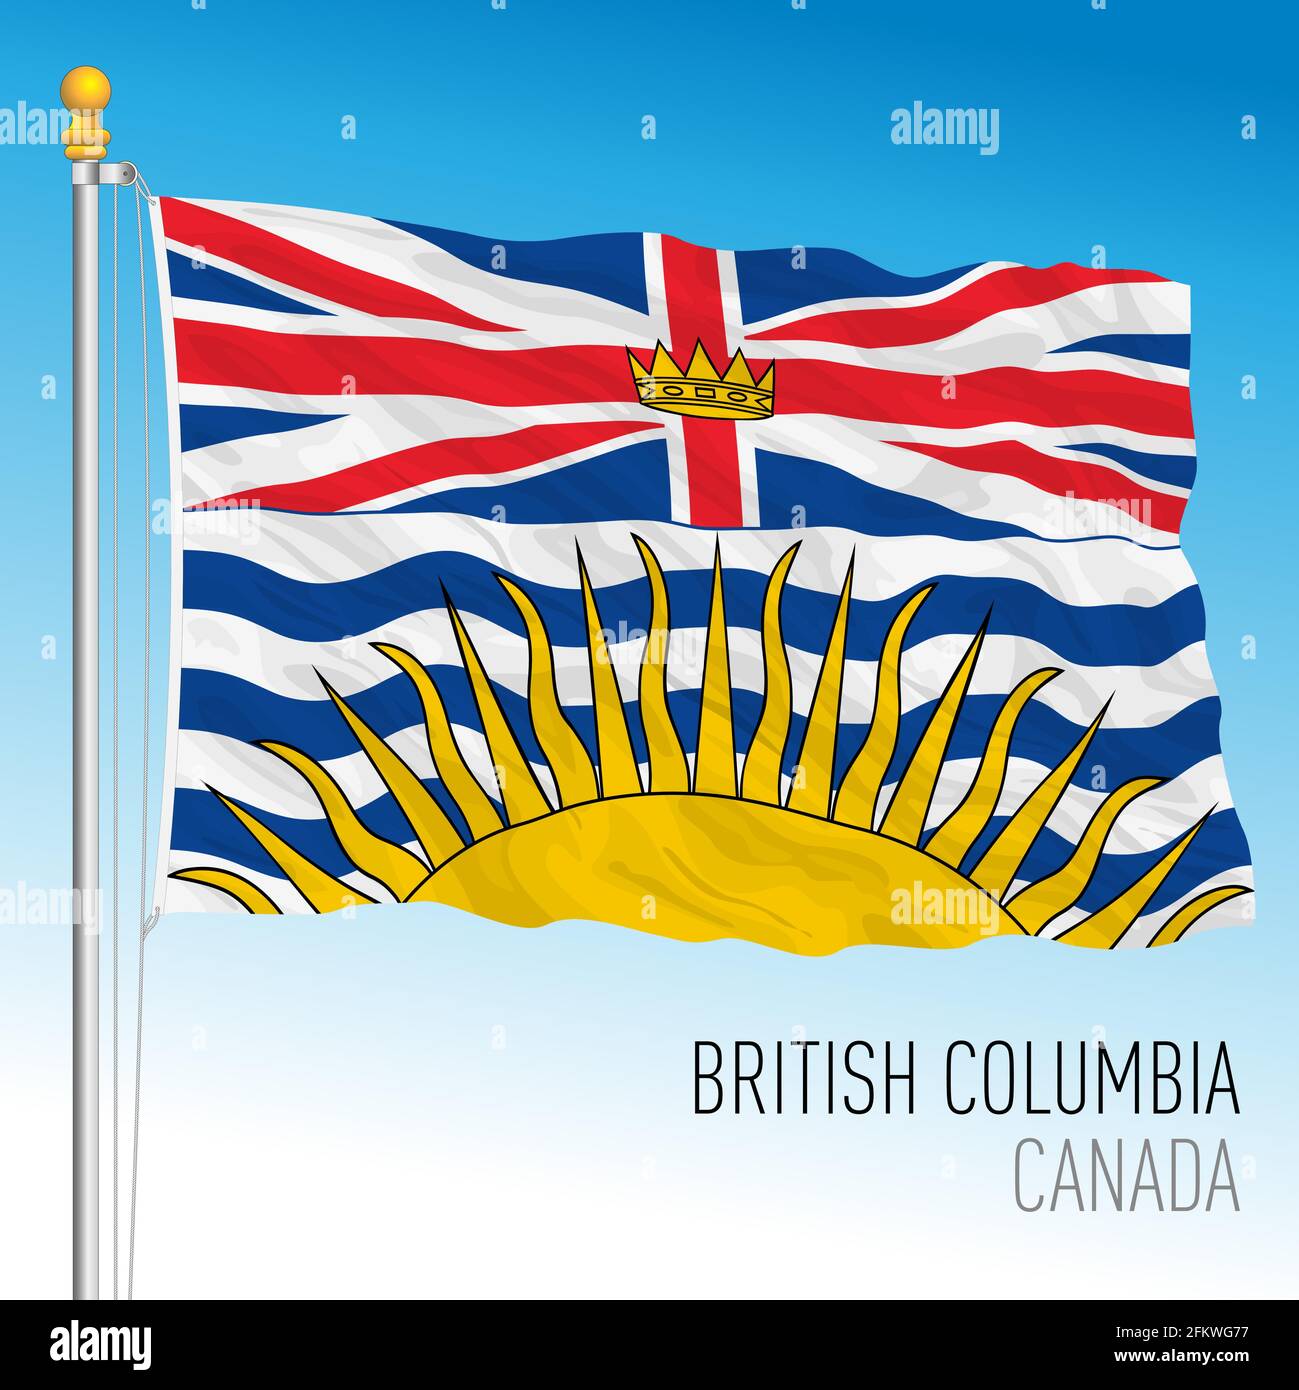 British Columbia territorial and regional flag, Canada, north american country, vector illustration Stock Vector